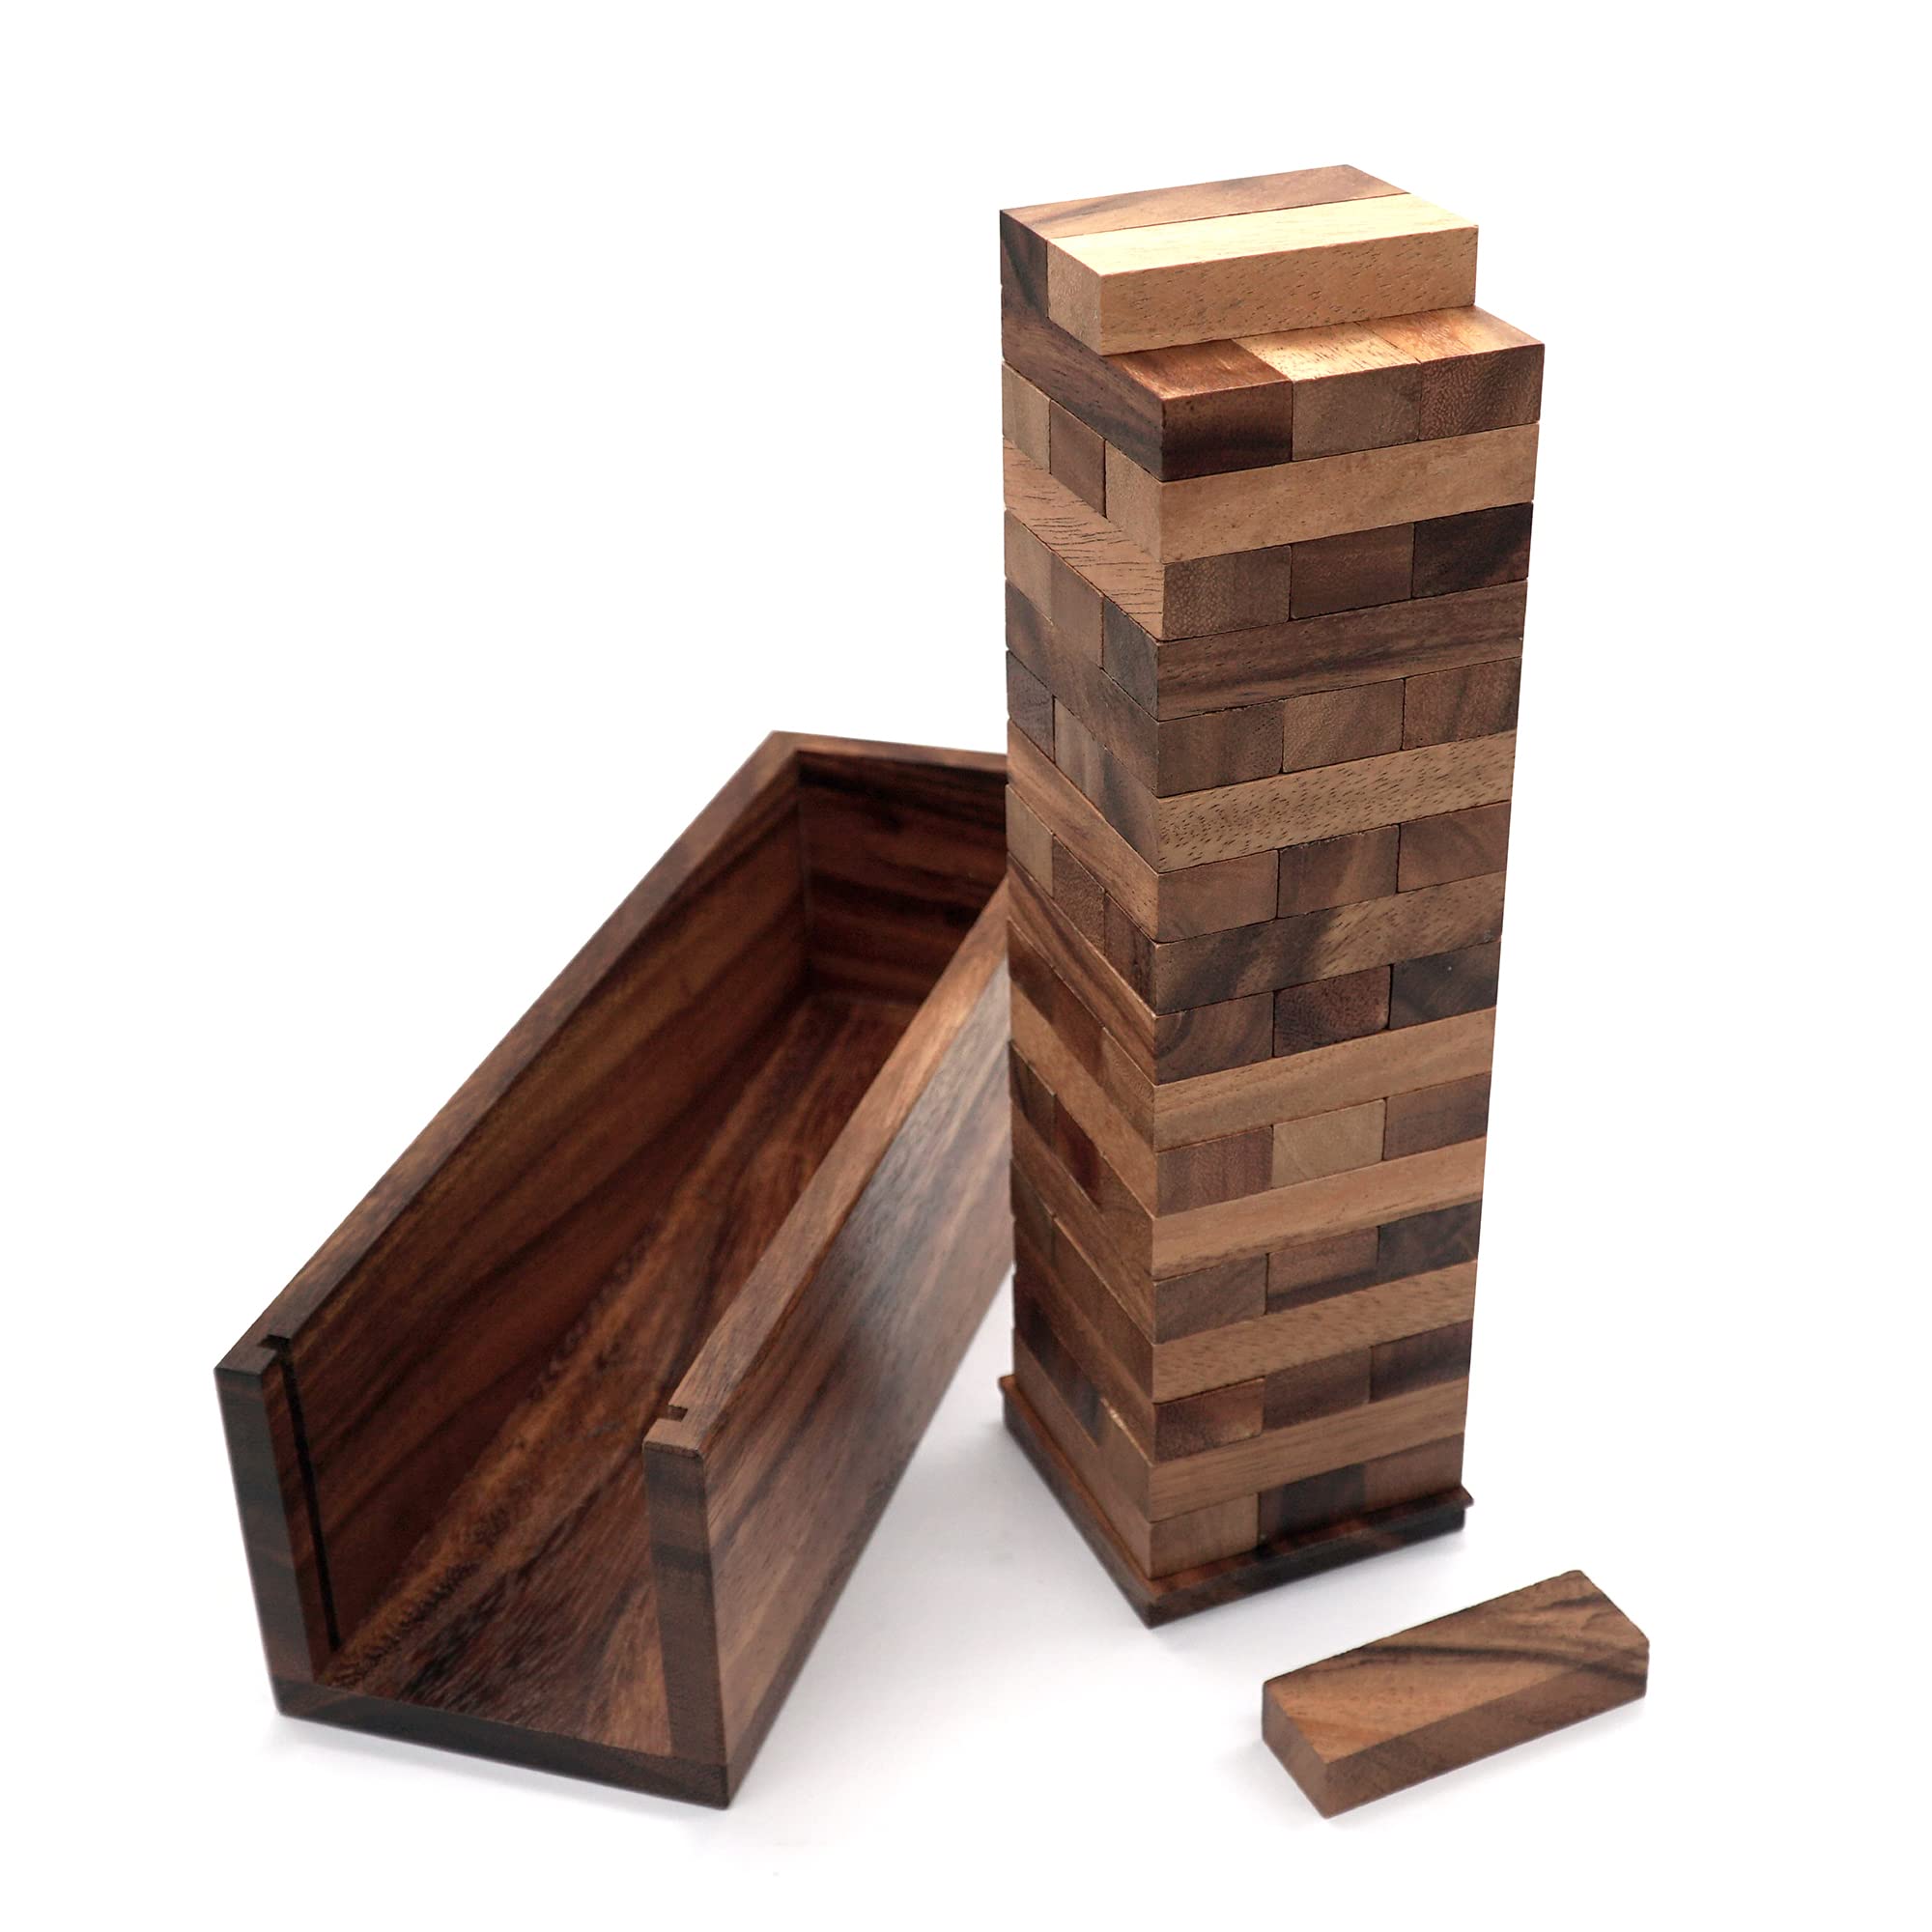 BSIRI Wood Tumbling Tower Game - Ideal for Party Games, Camping Games, Outdoor Games for Adults and Family, Classic Stacking Block Games for Challenging Your Skills